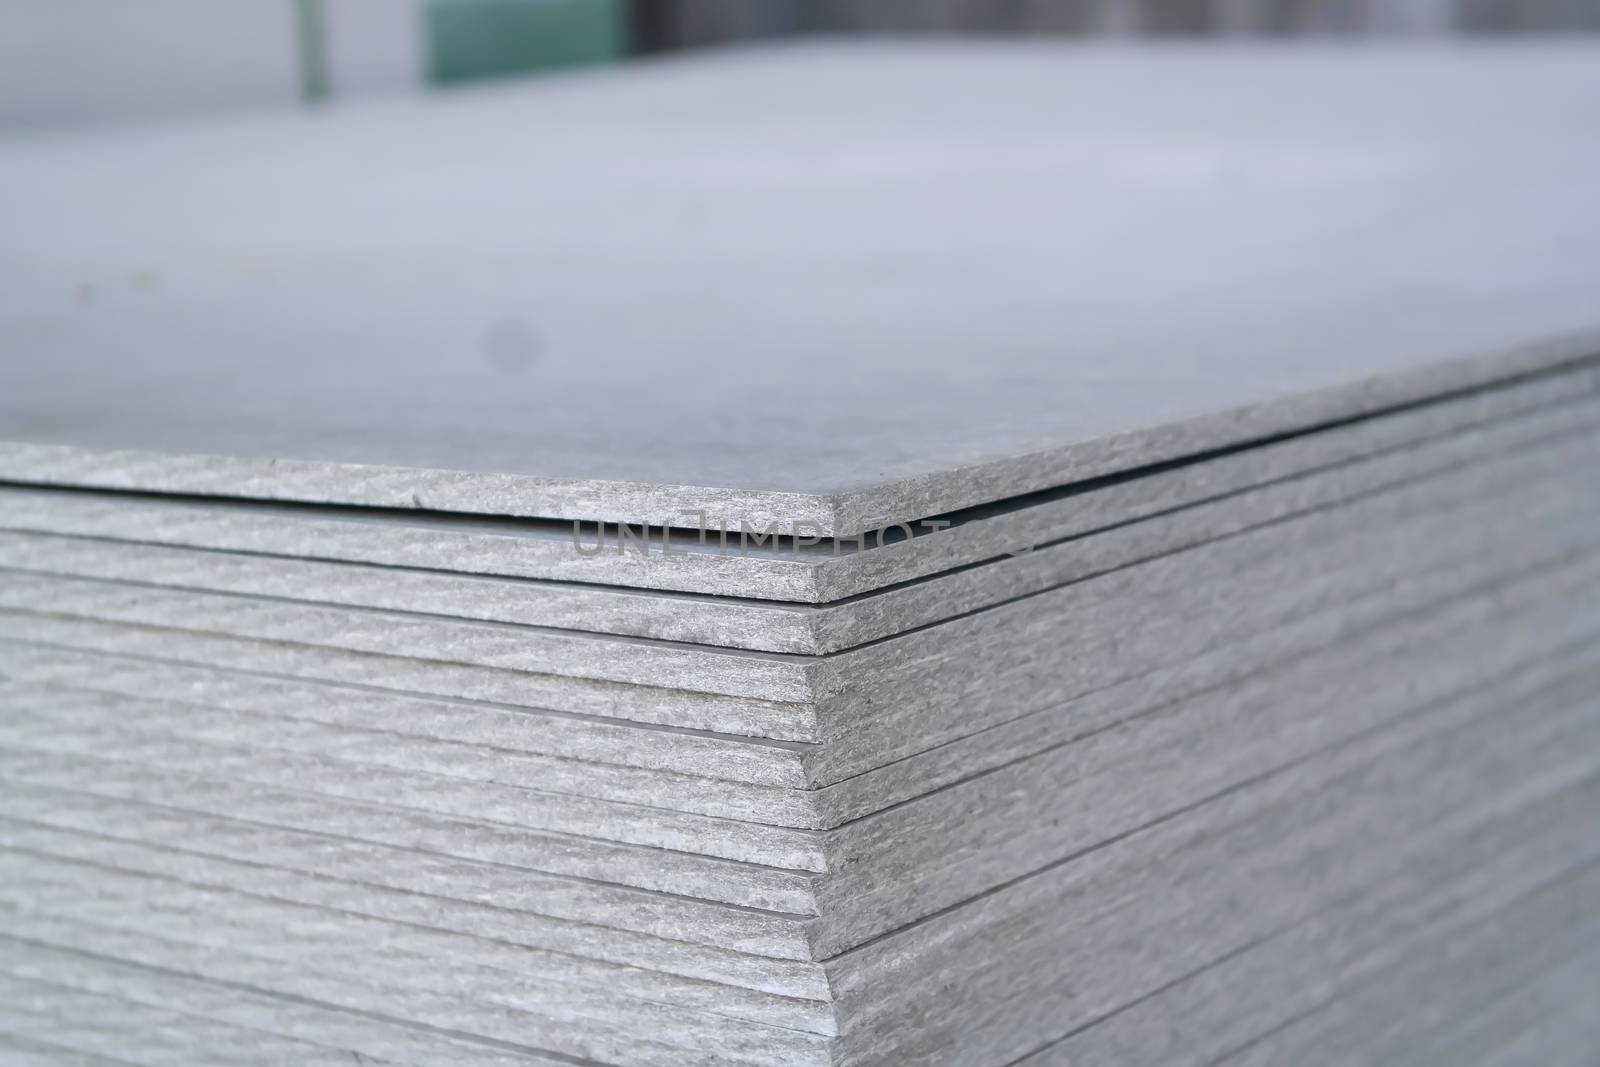 asbestos-cement slates stacked for use in home construction.